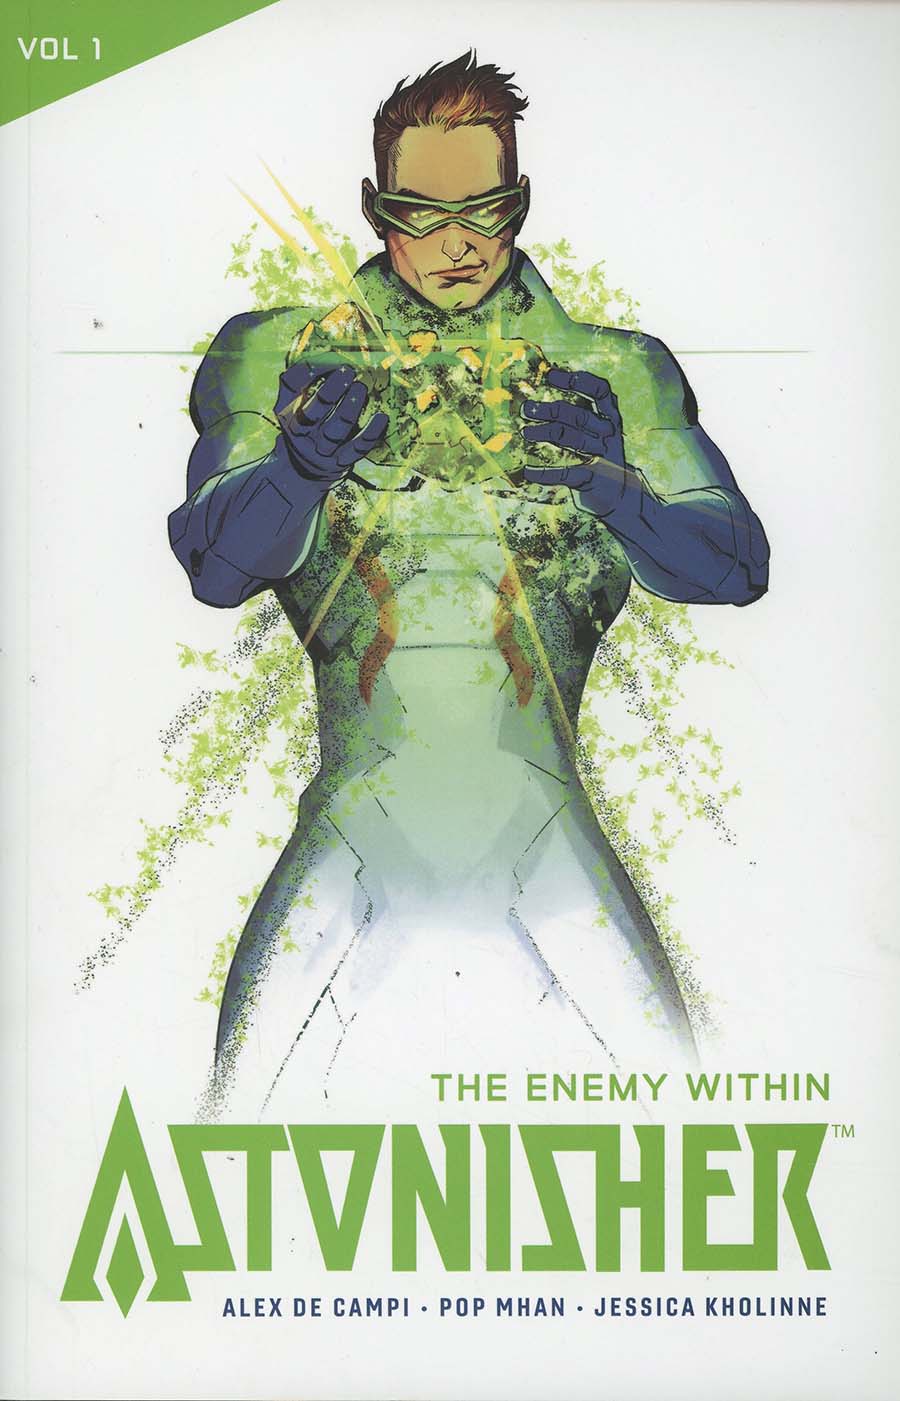 Catalyst Prime Astonisher Vol 1 Enemy Within TP